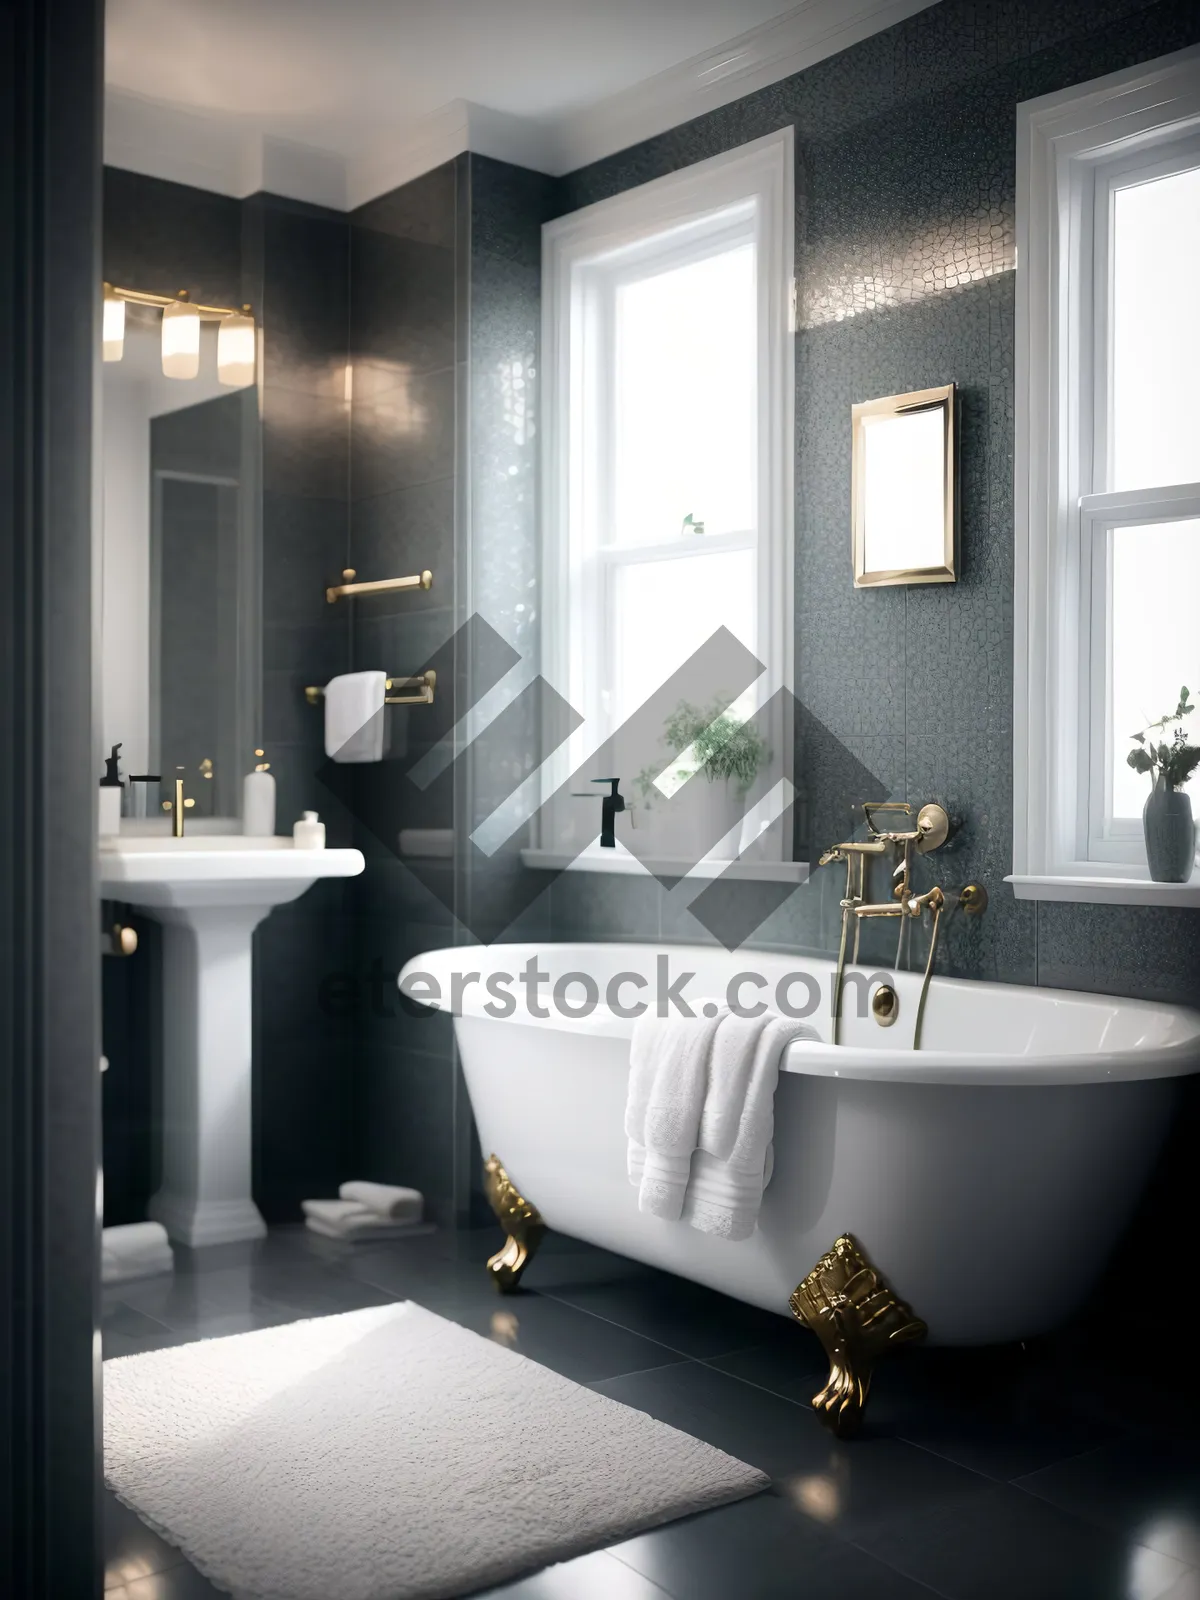 Picture of Modern luxury bathroom with clean tile design